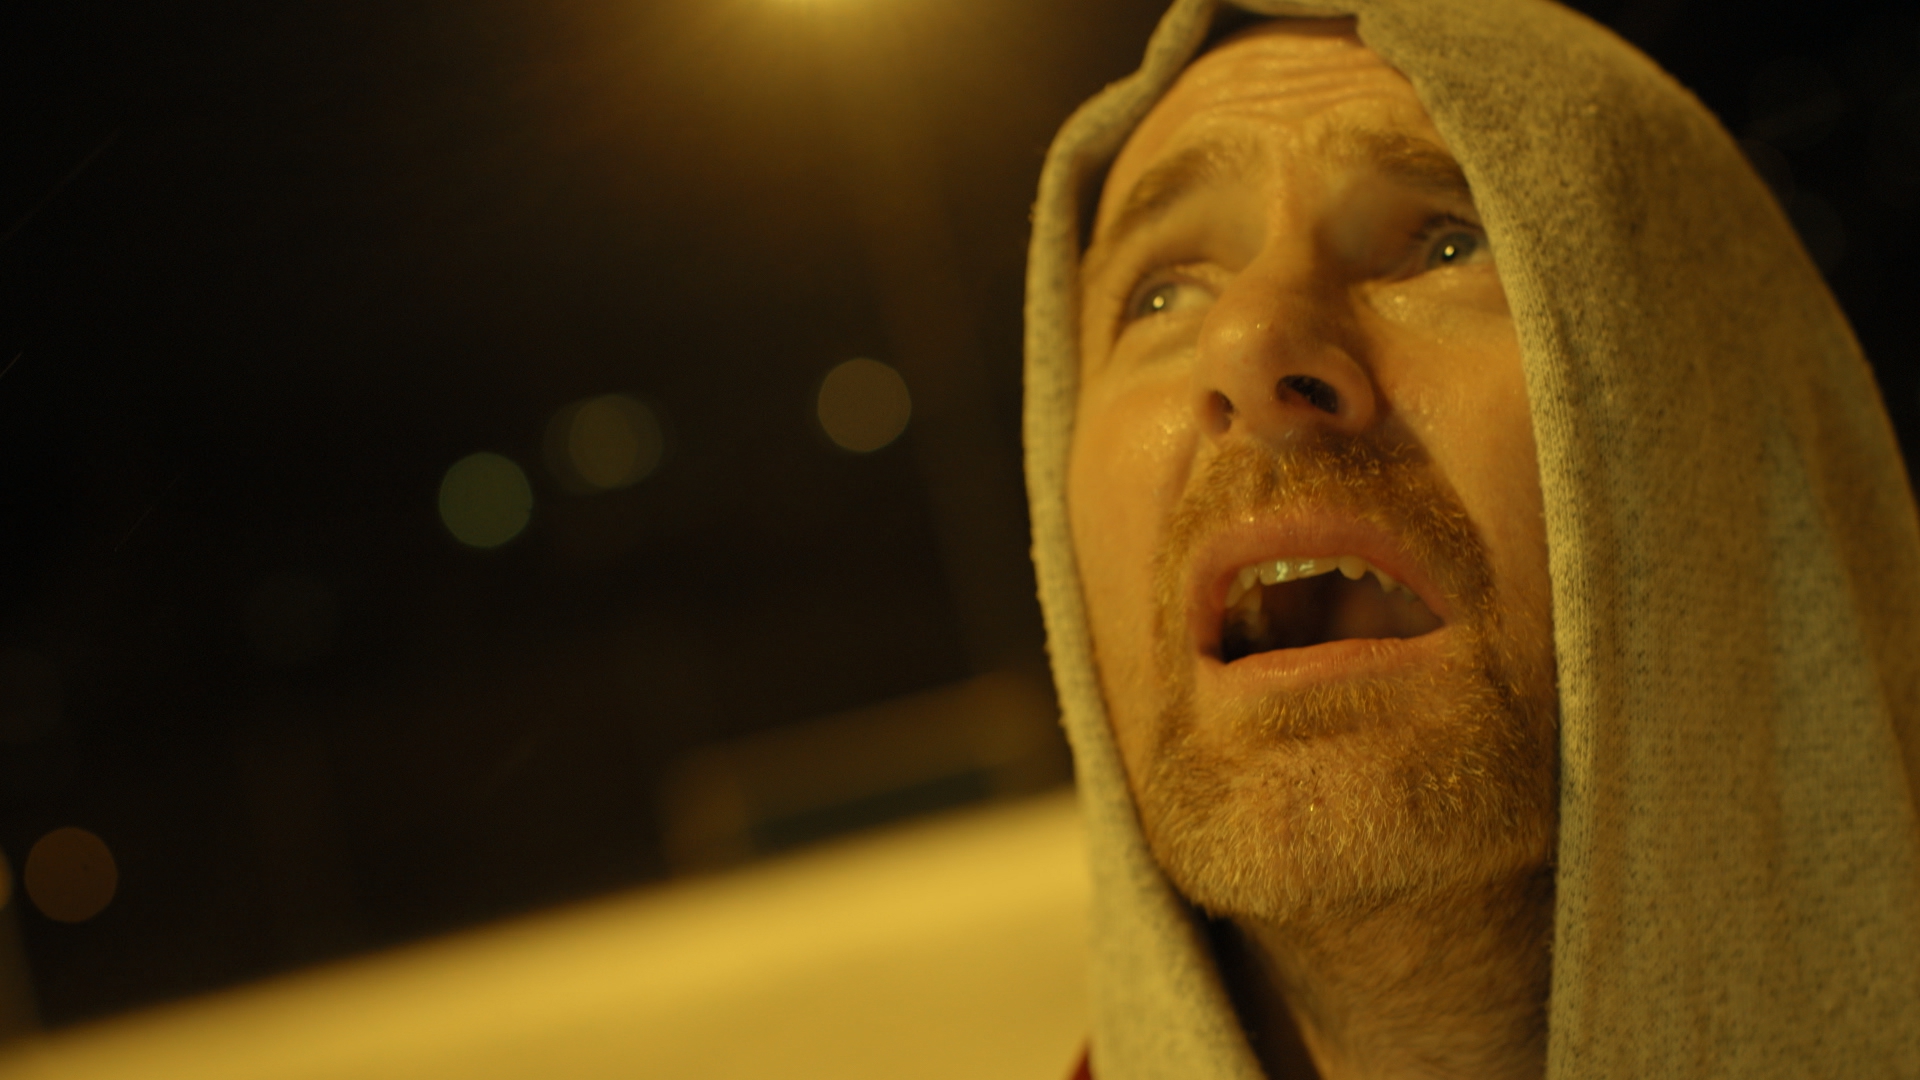 The Third Eye frame grab. Crime drama for TV2 produced by Rubicon Norway. Starring Kyrre Haugen Sydness.